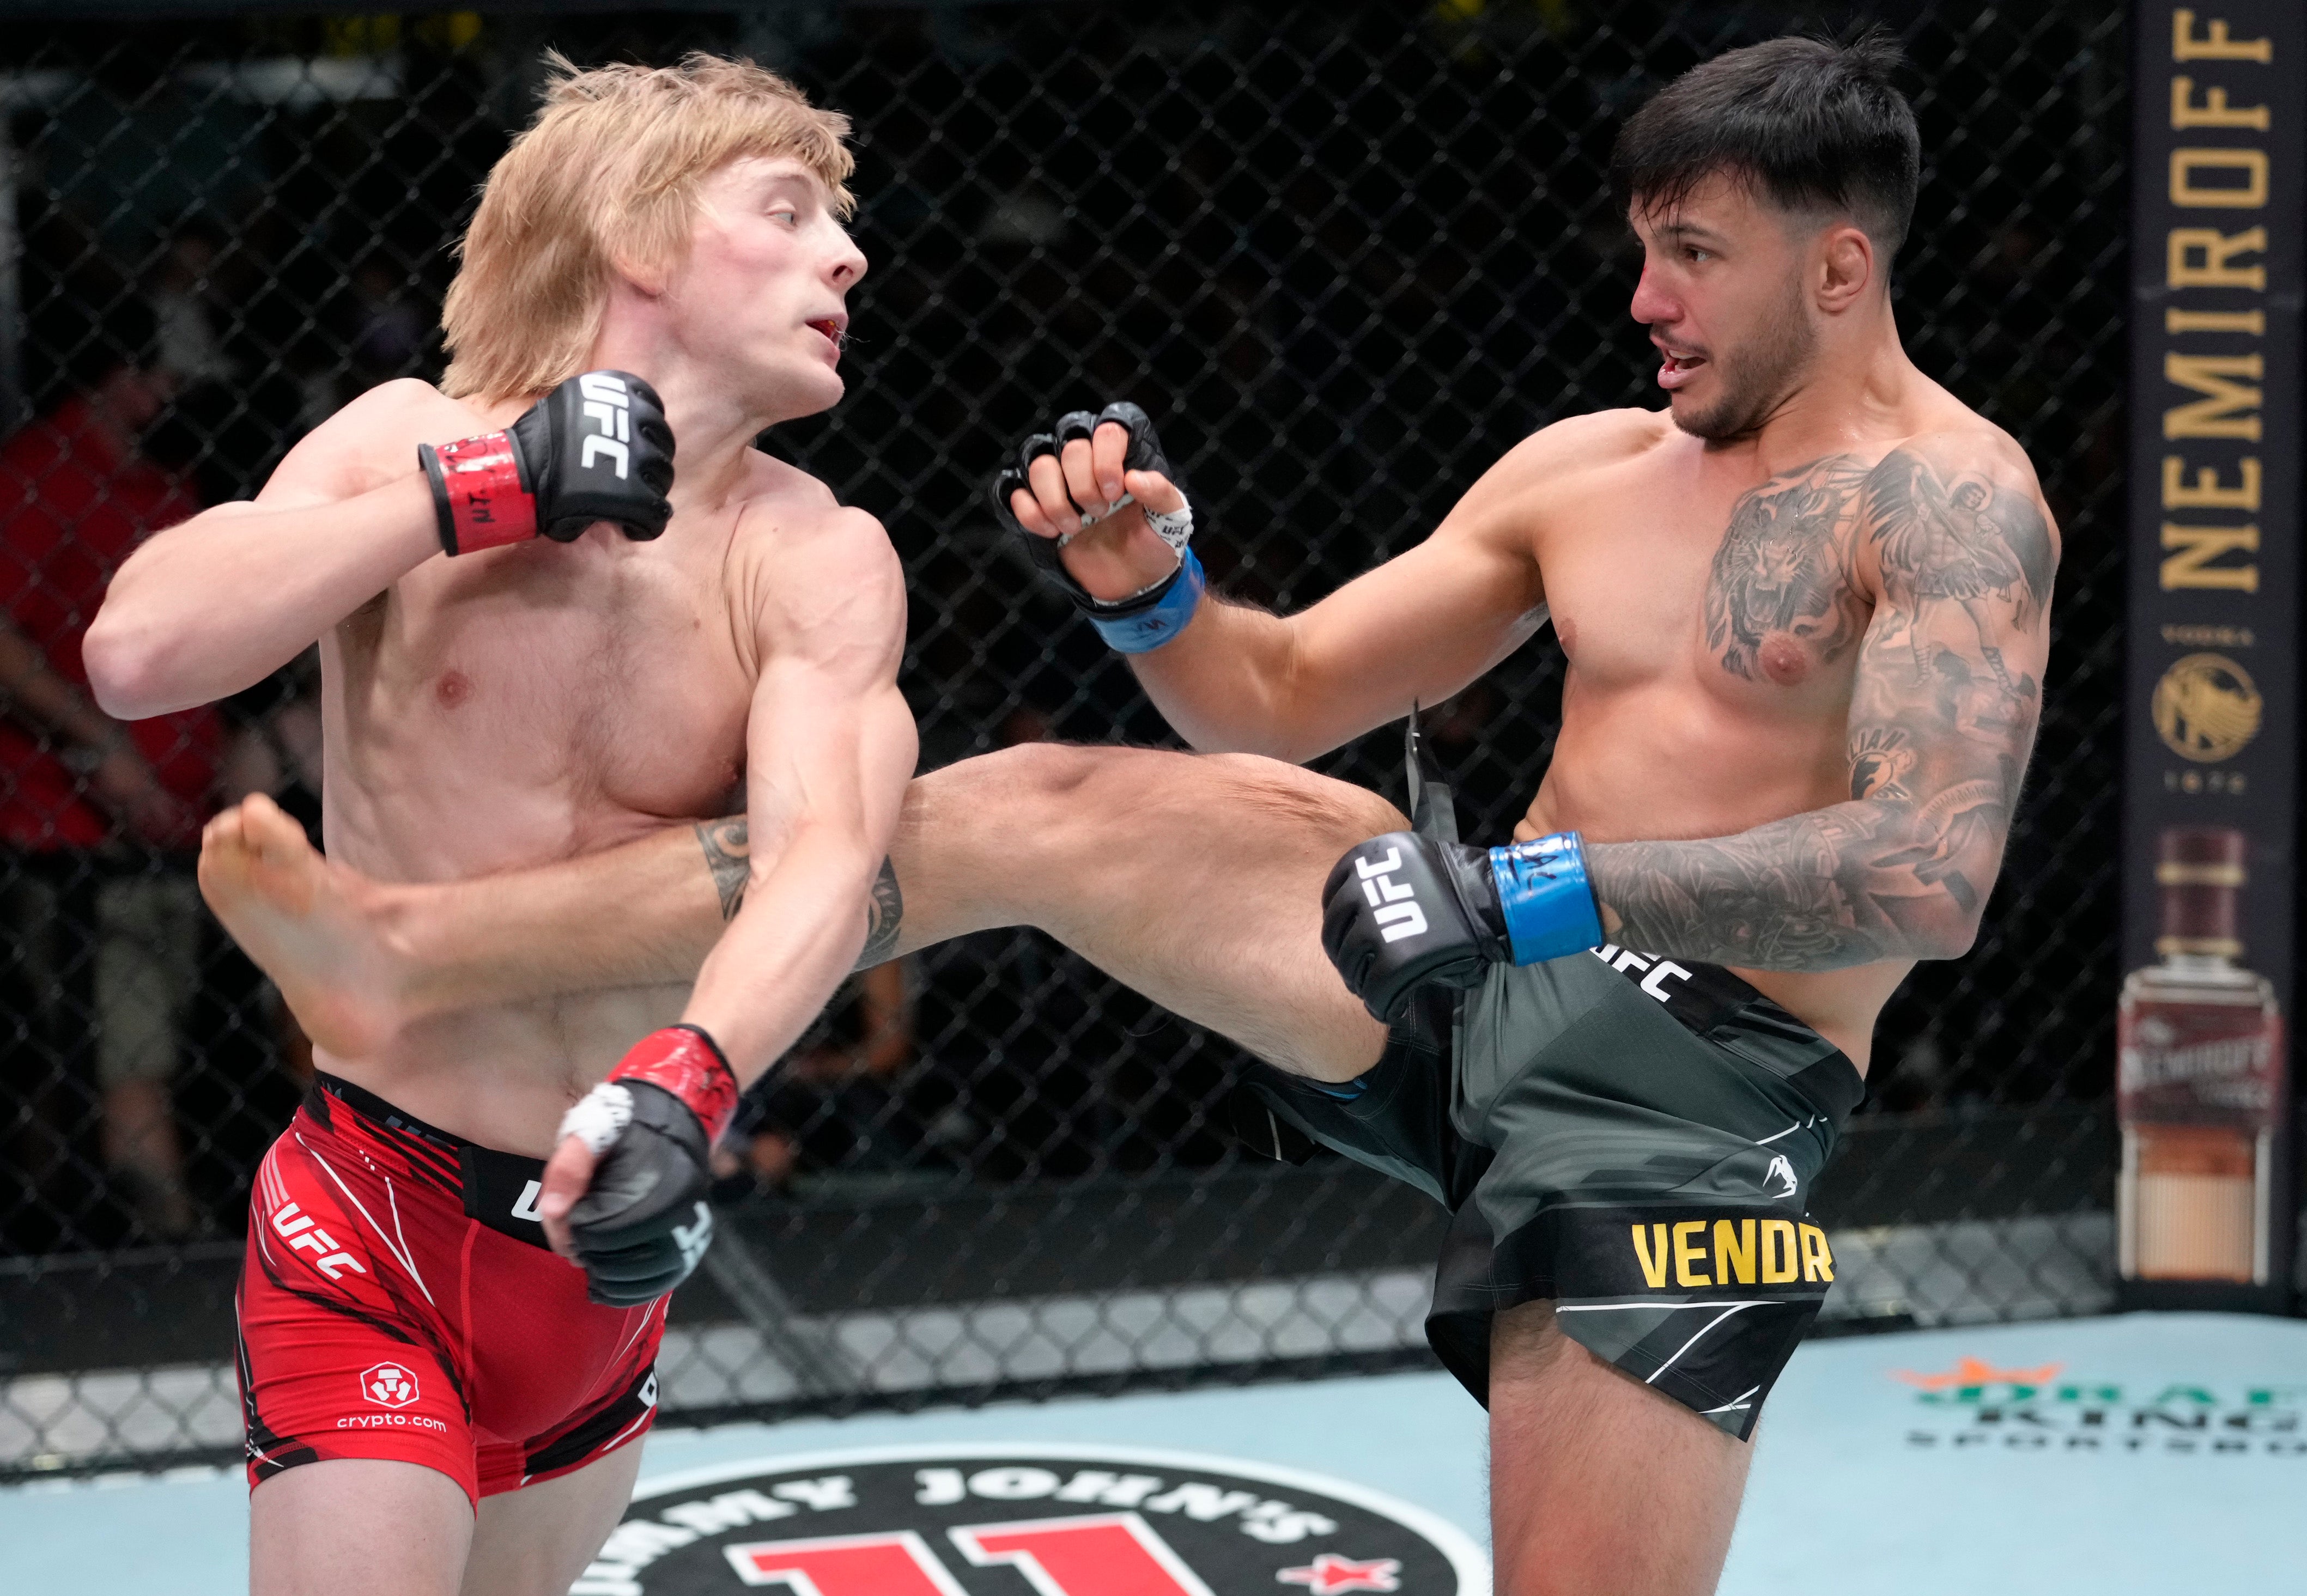 Liverpool’s Paddy Pimblett (left) won his UFC debut via first-round knockout